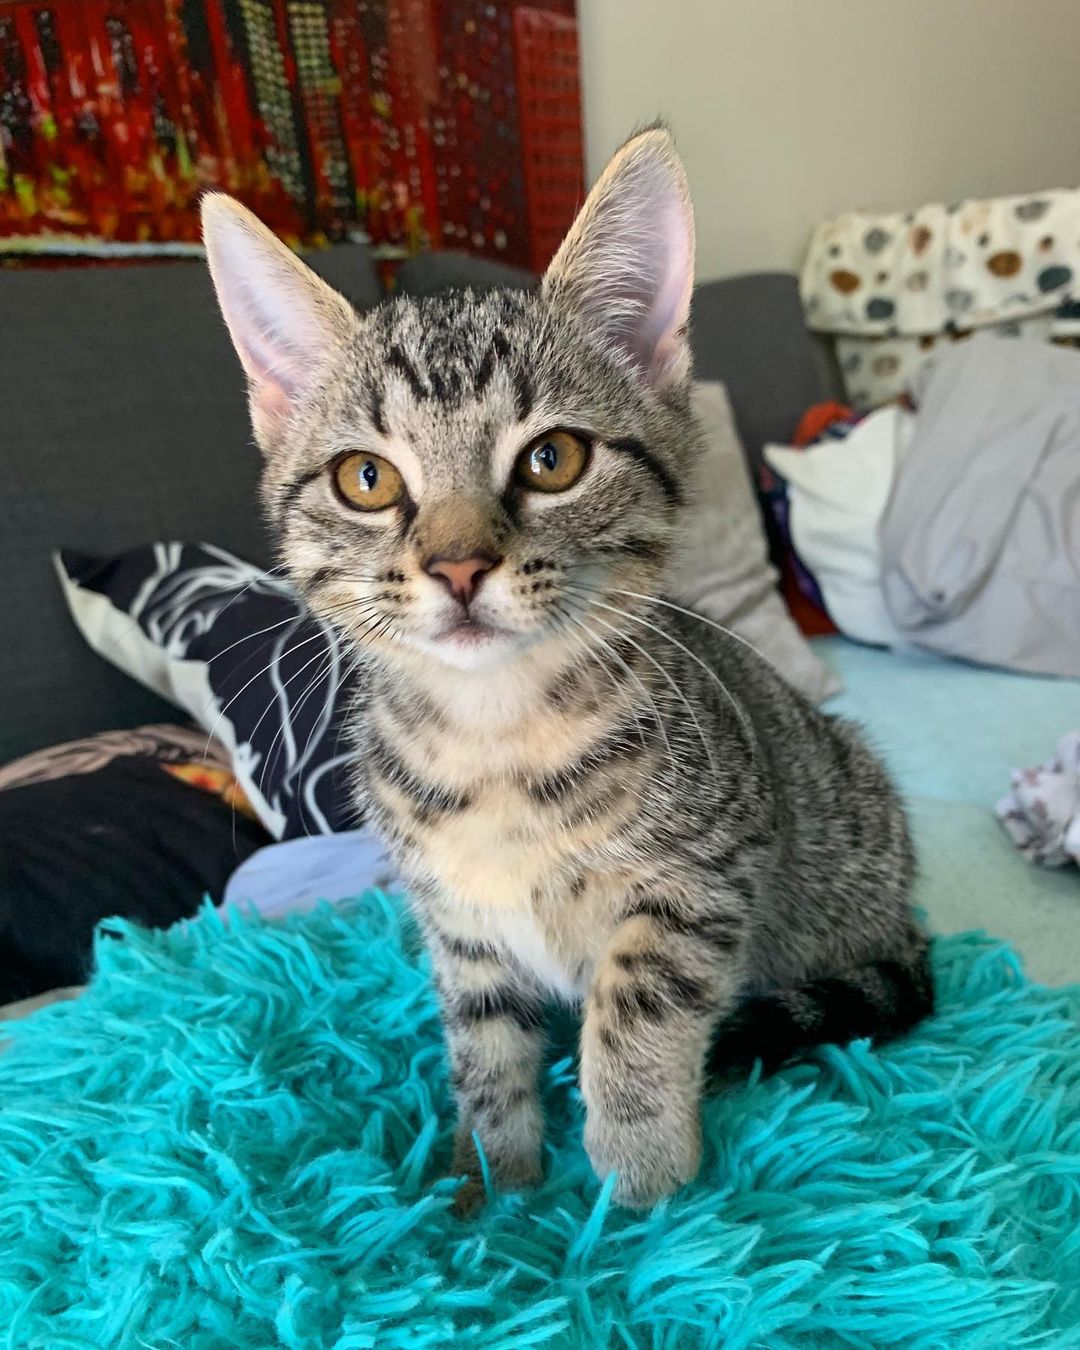 Miso is dog, cat, & kid friendly. She loves to spend her days cuddling and is a little purr monster! She has an amazing personality and will make an amazing addition to any loving home. Please apply to adopt Miso today ♥️